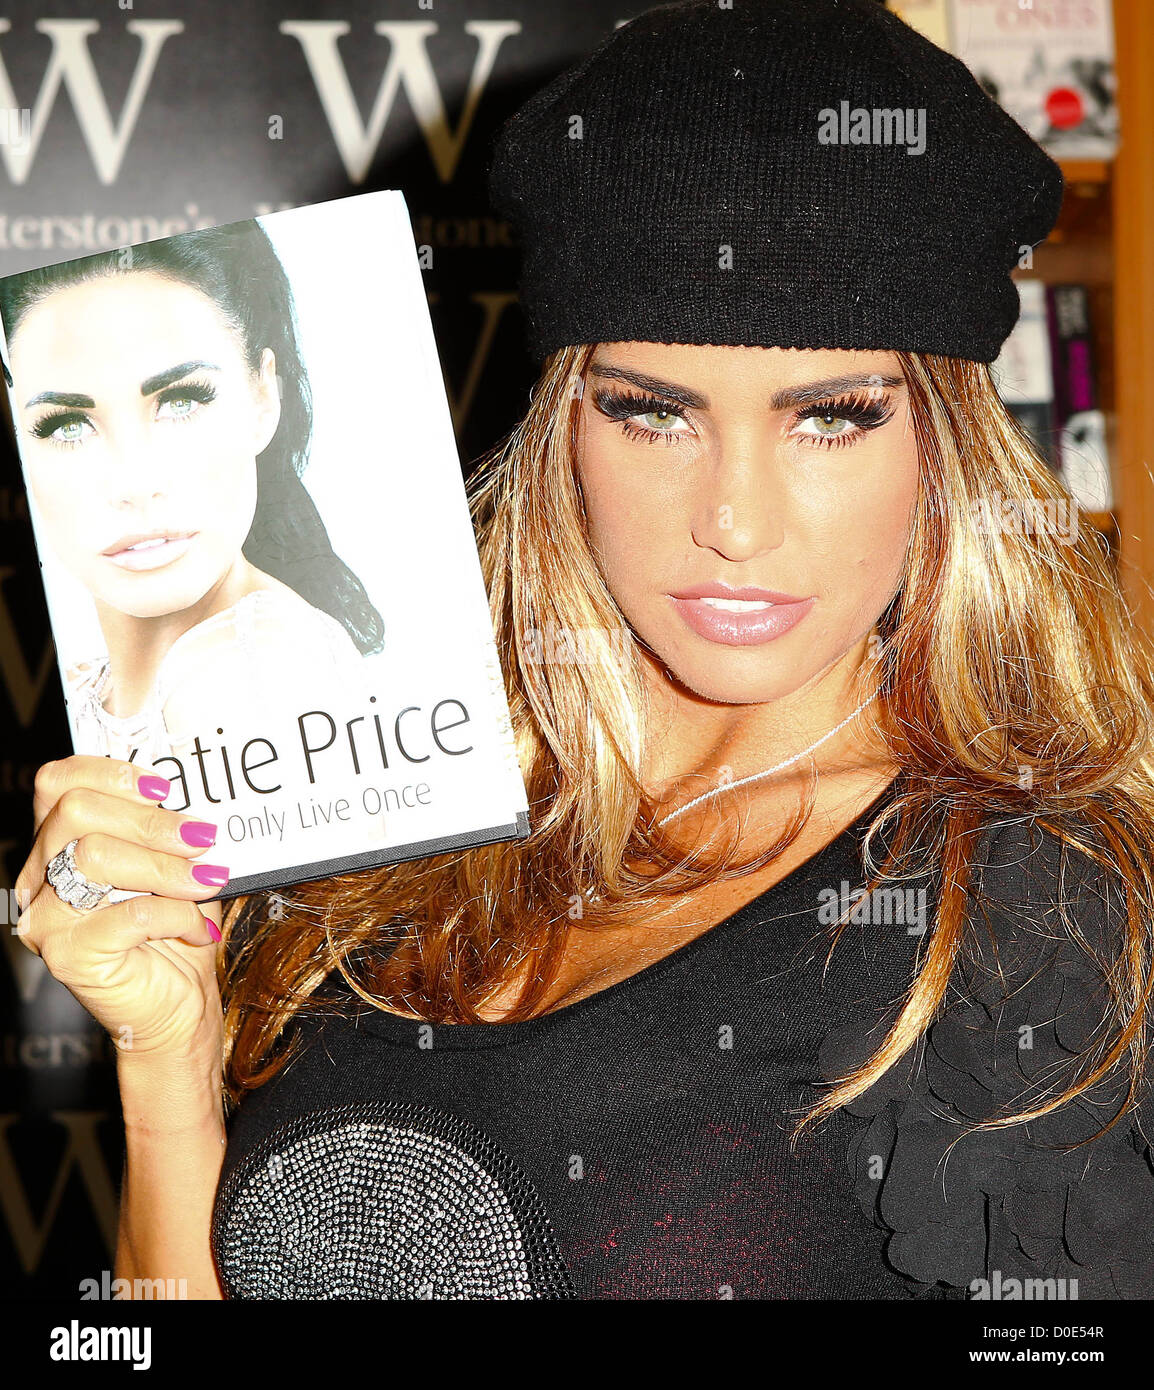 Katie Price signs copies of her book 'You Only Live Once' at Waterstones Boston Lincolnshire, England - 29.10.10 Stock Photo